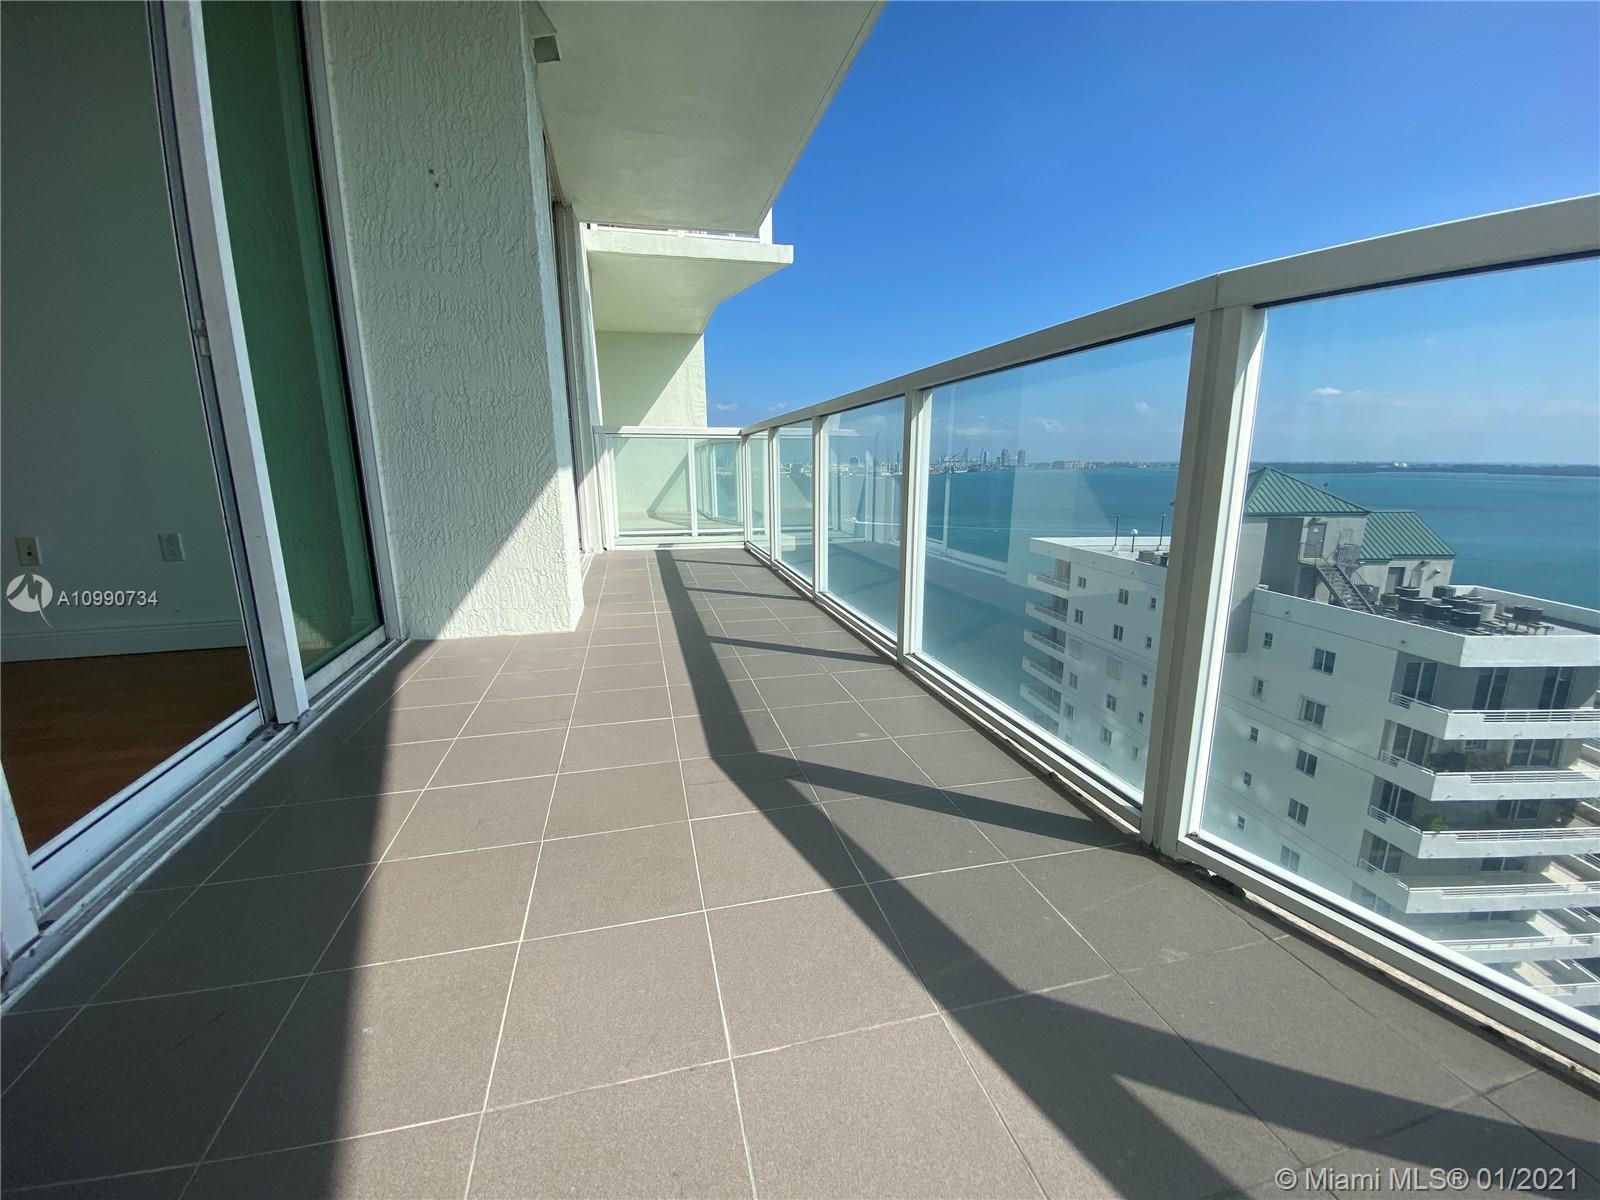 Photo 2 of The Emerald At Brickell Co Apt 1903 in Miami - MLS A10990734